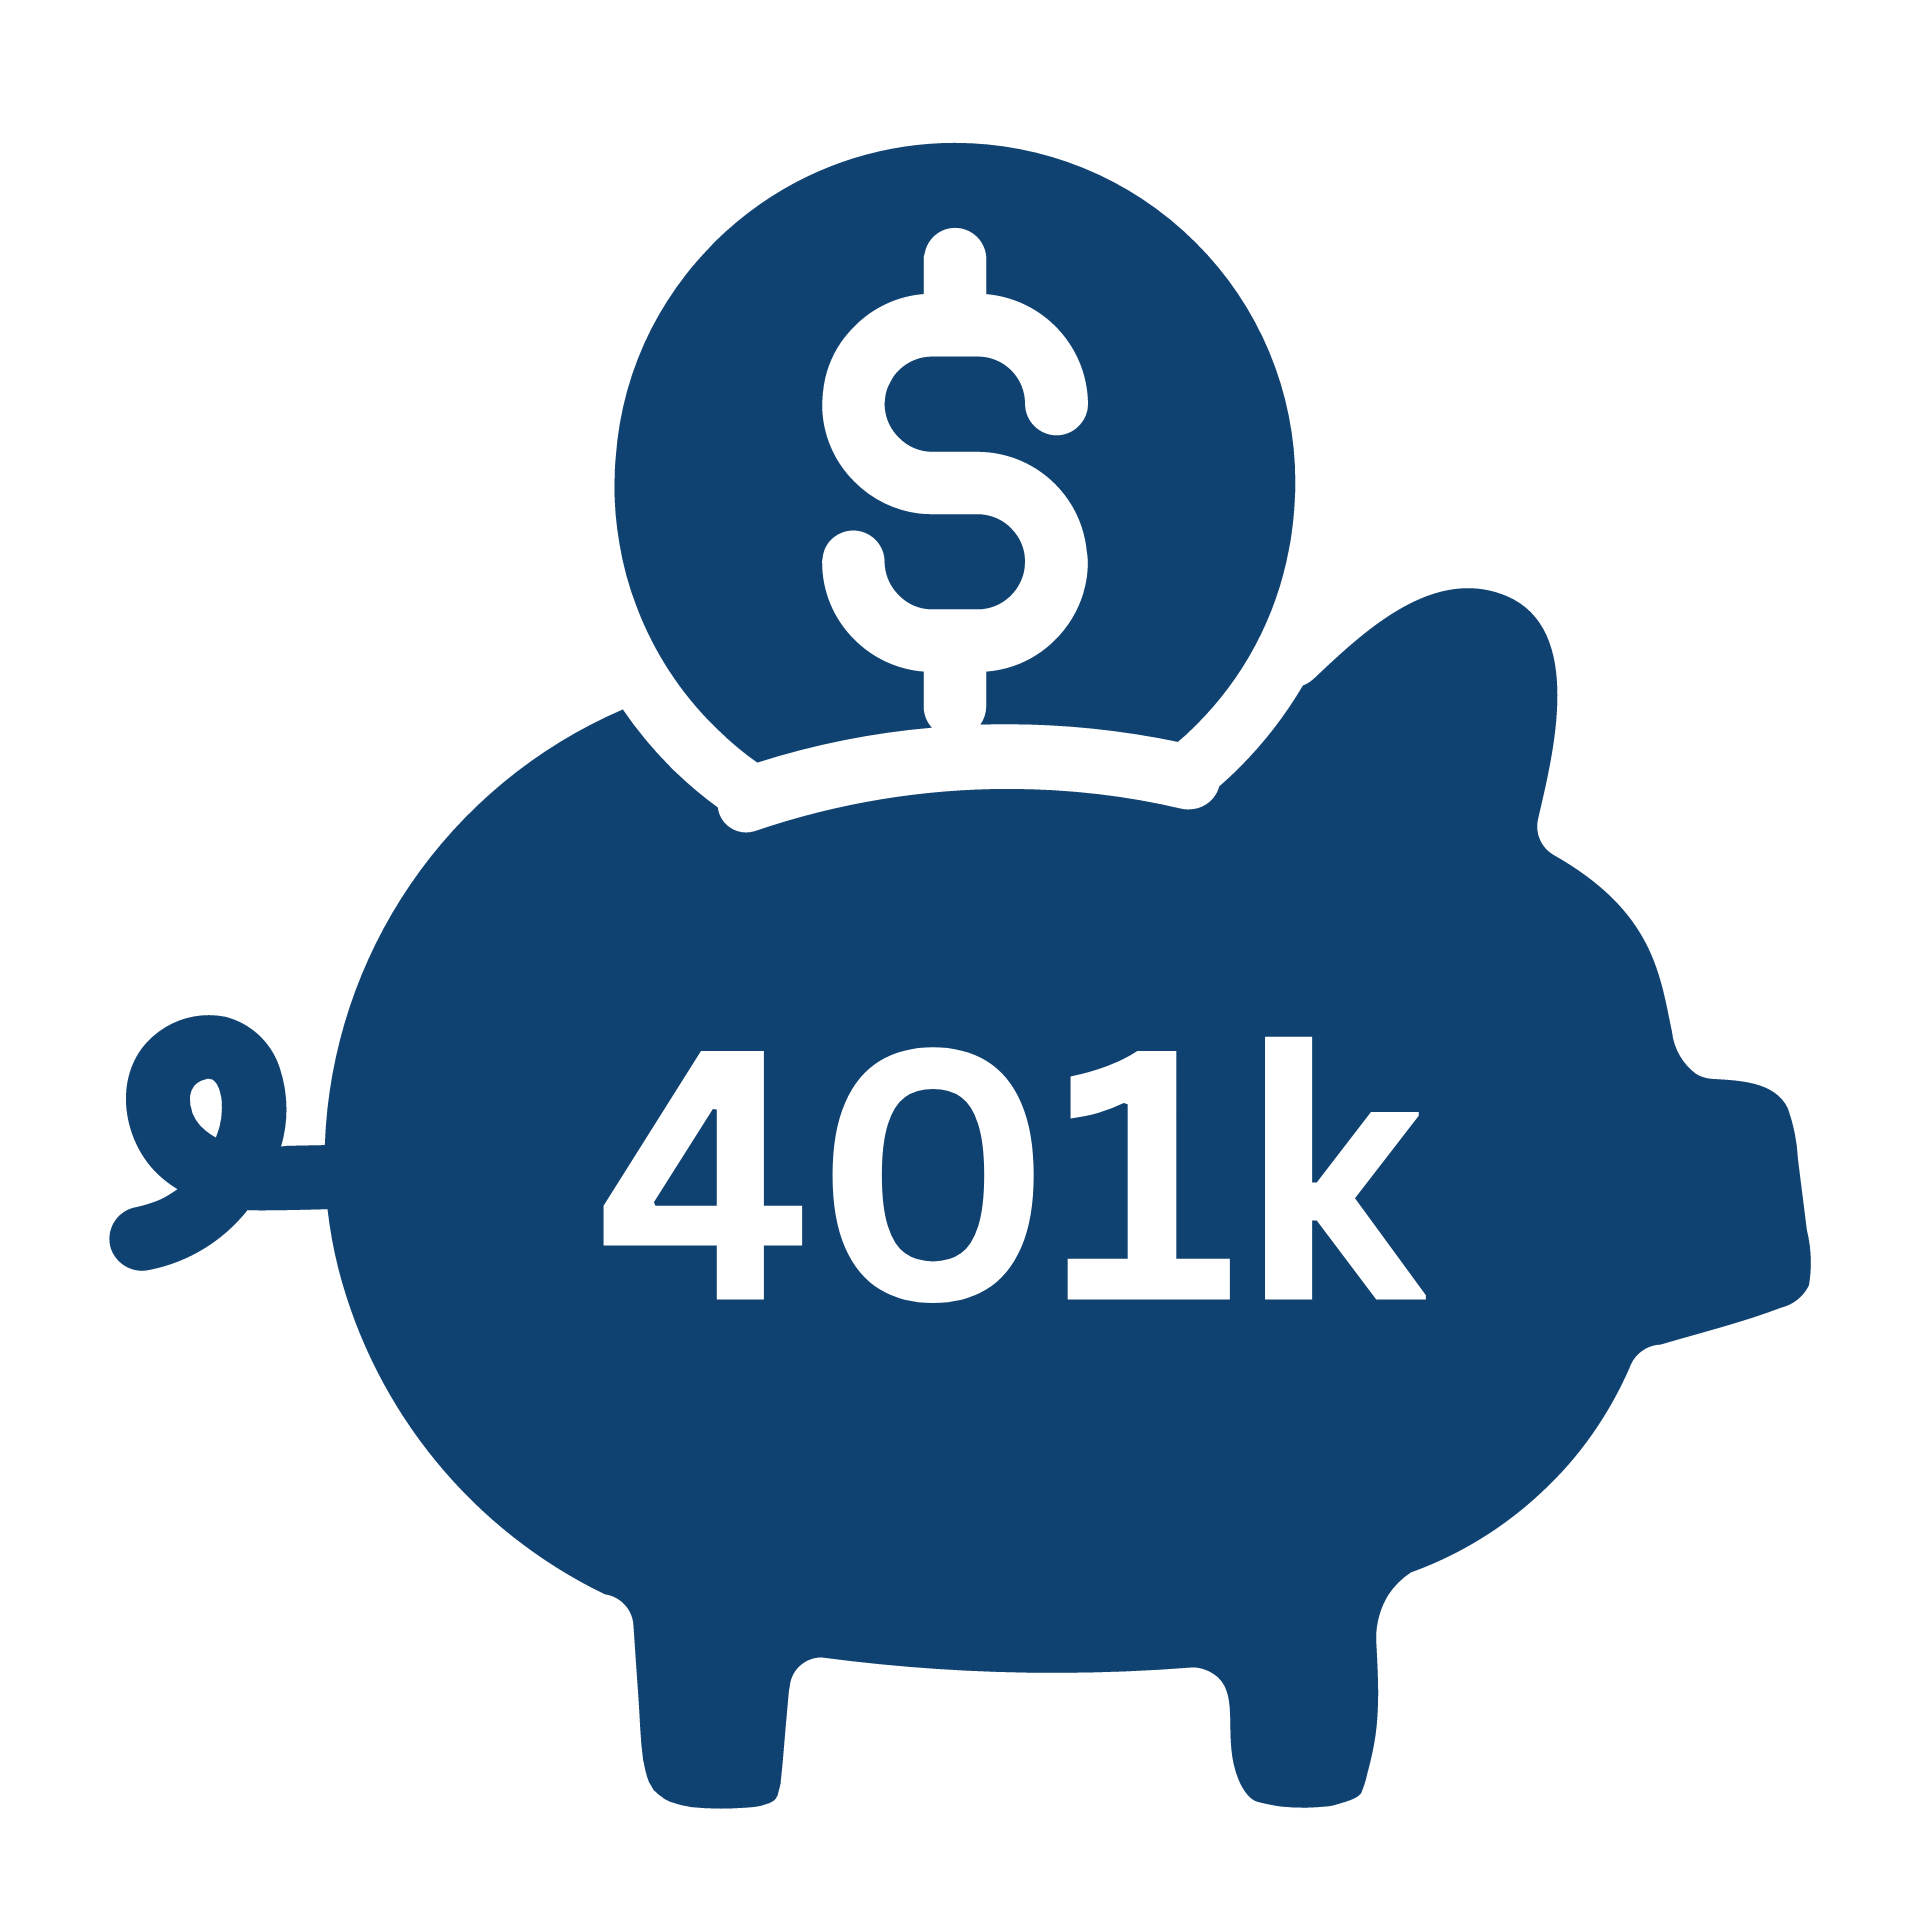 401k/ESOP- Receive a 401k match and become part of our Employee Stock Ownership Plan. 